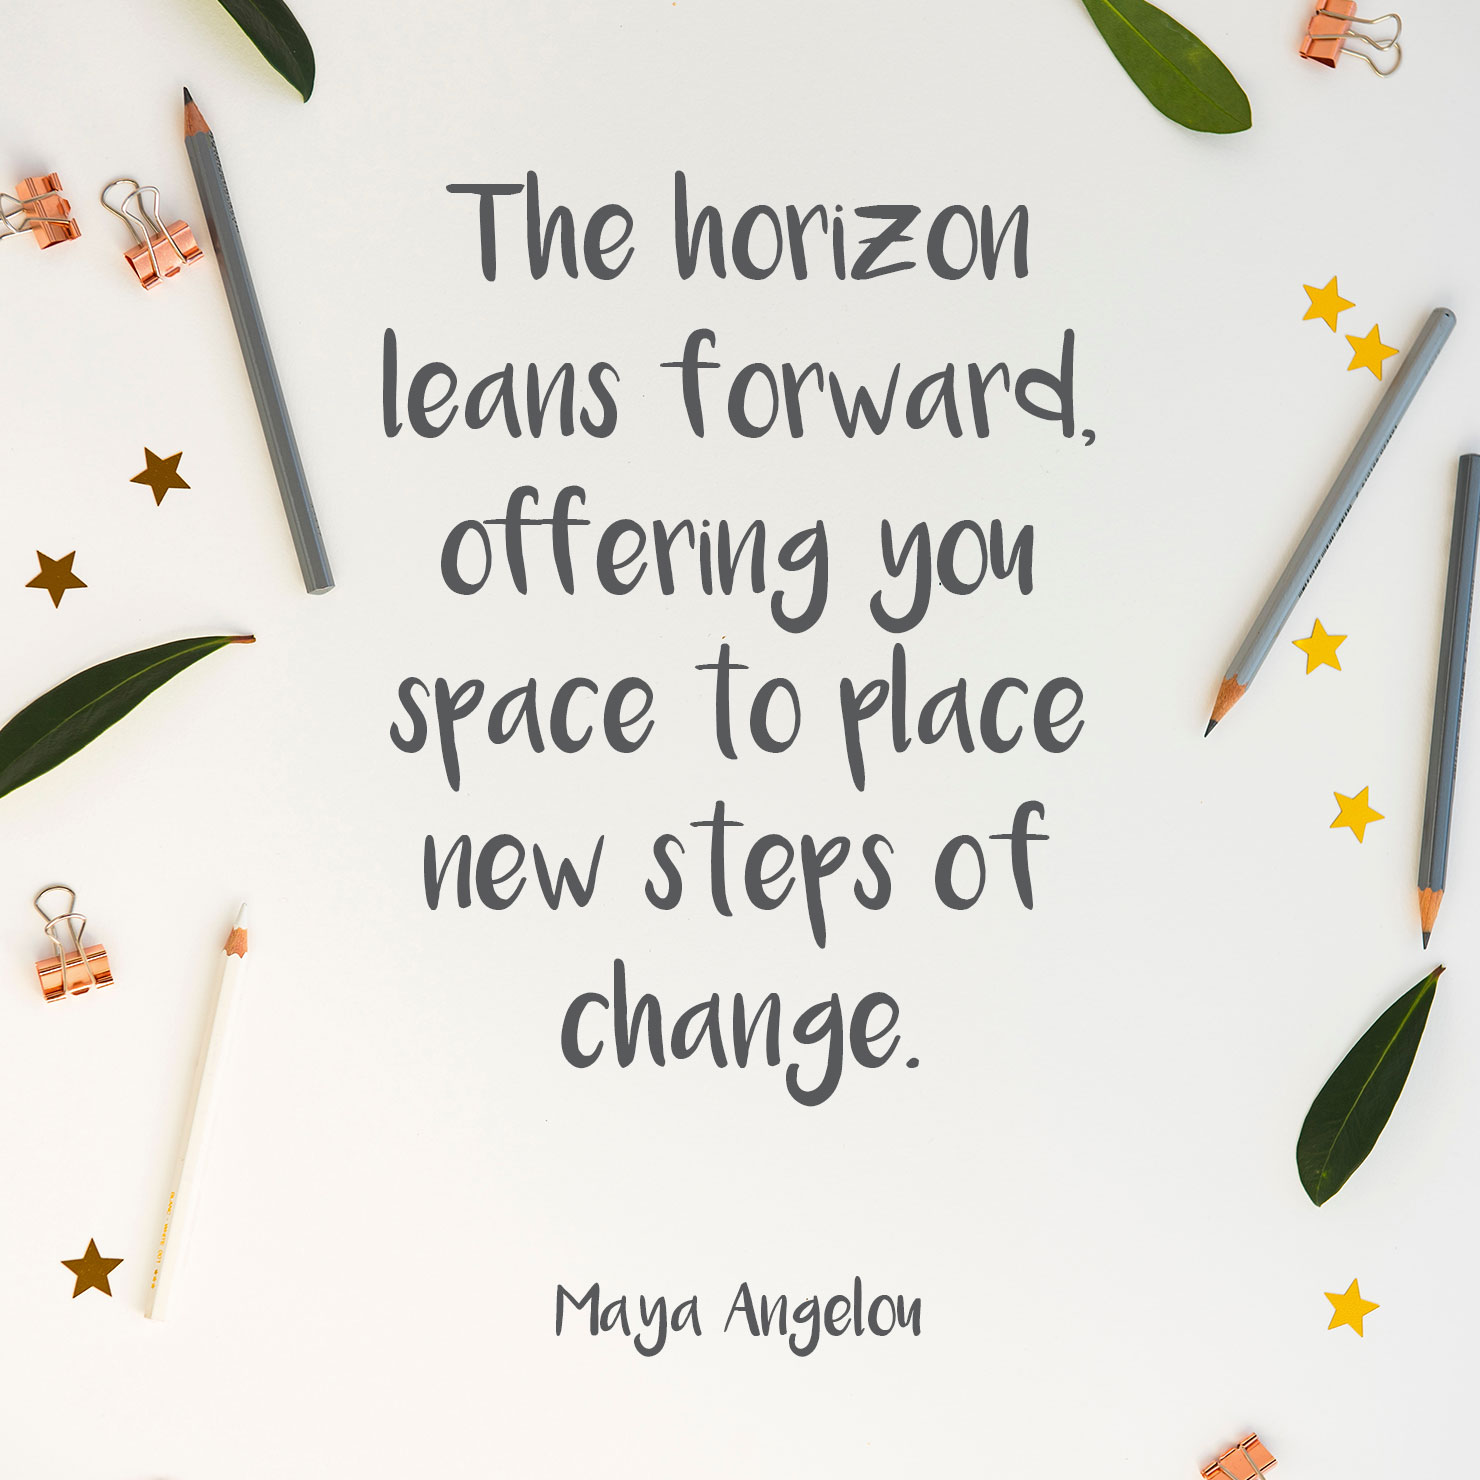 for daughter graduation quote: the horizon leans forward offering you space to place new steps of change - Maya Angelou